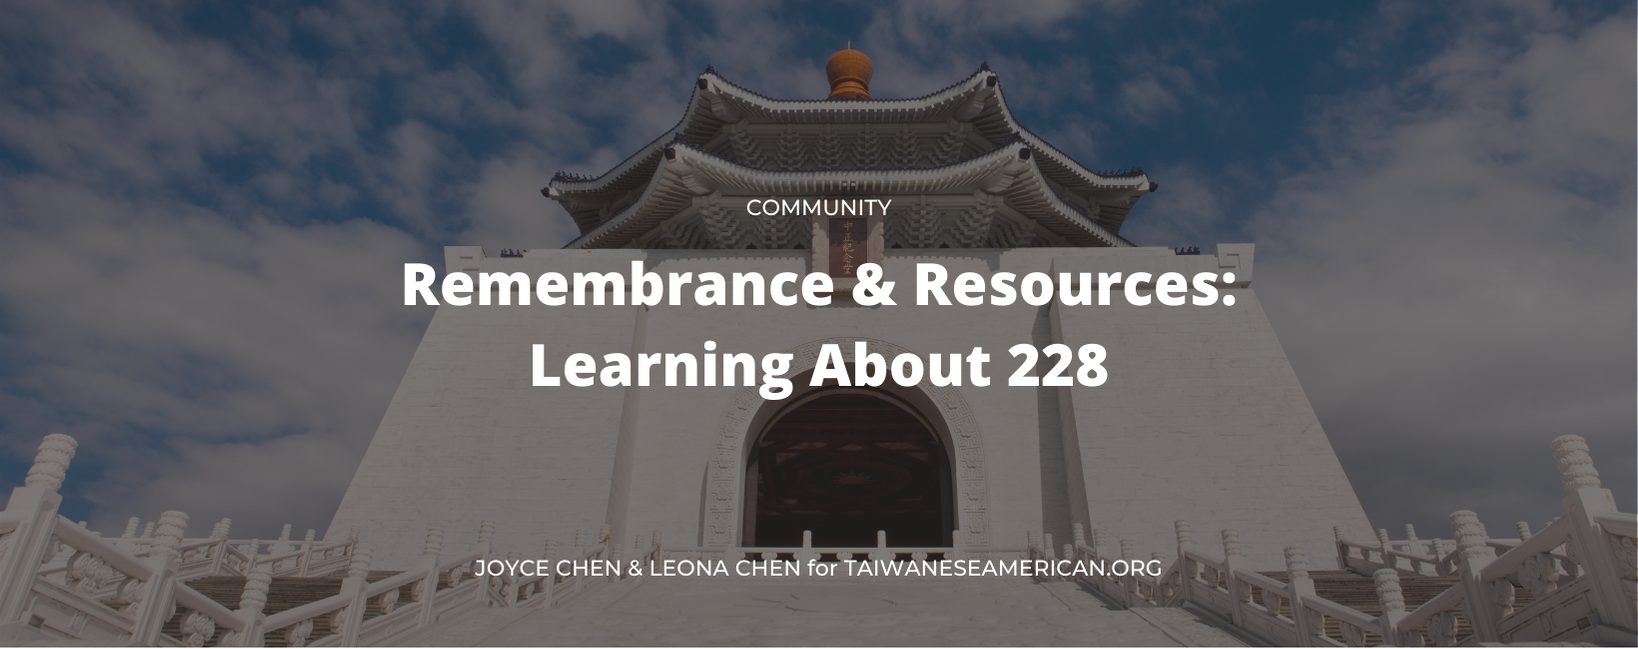 Remembrance & Resources: Learning About 228